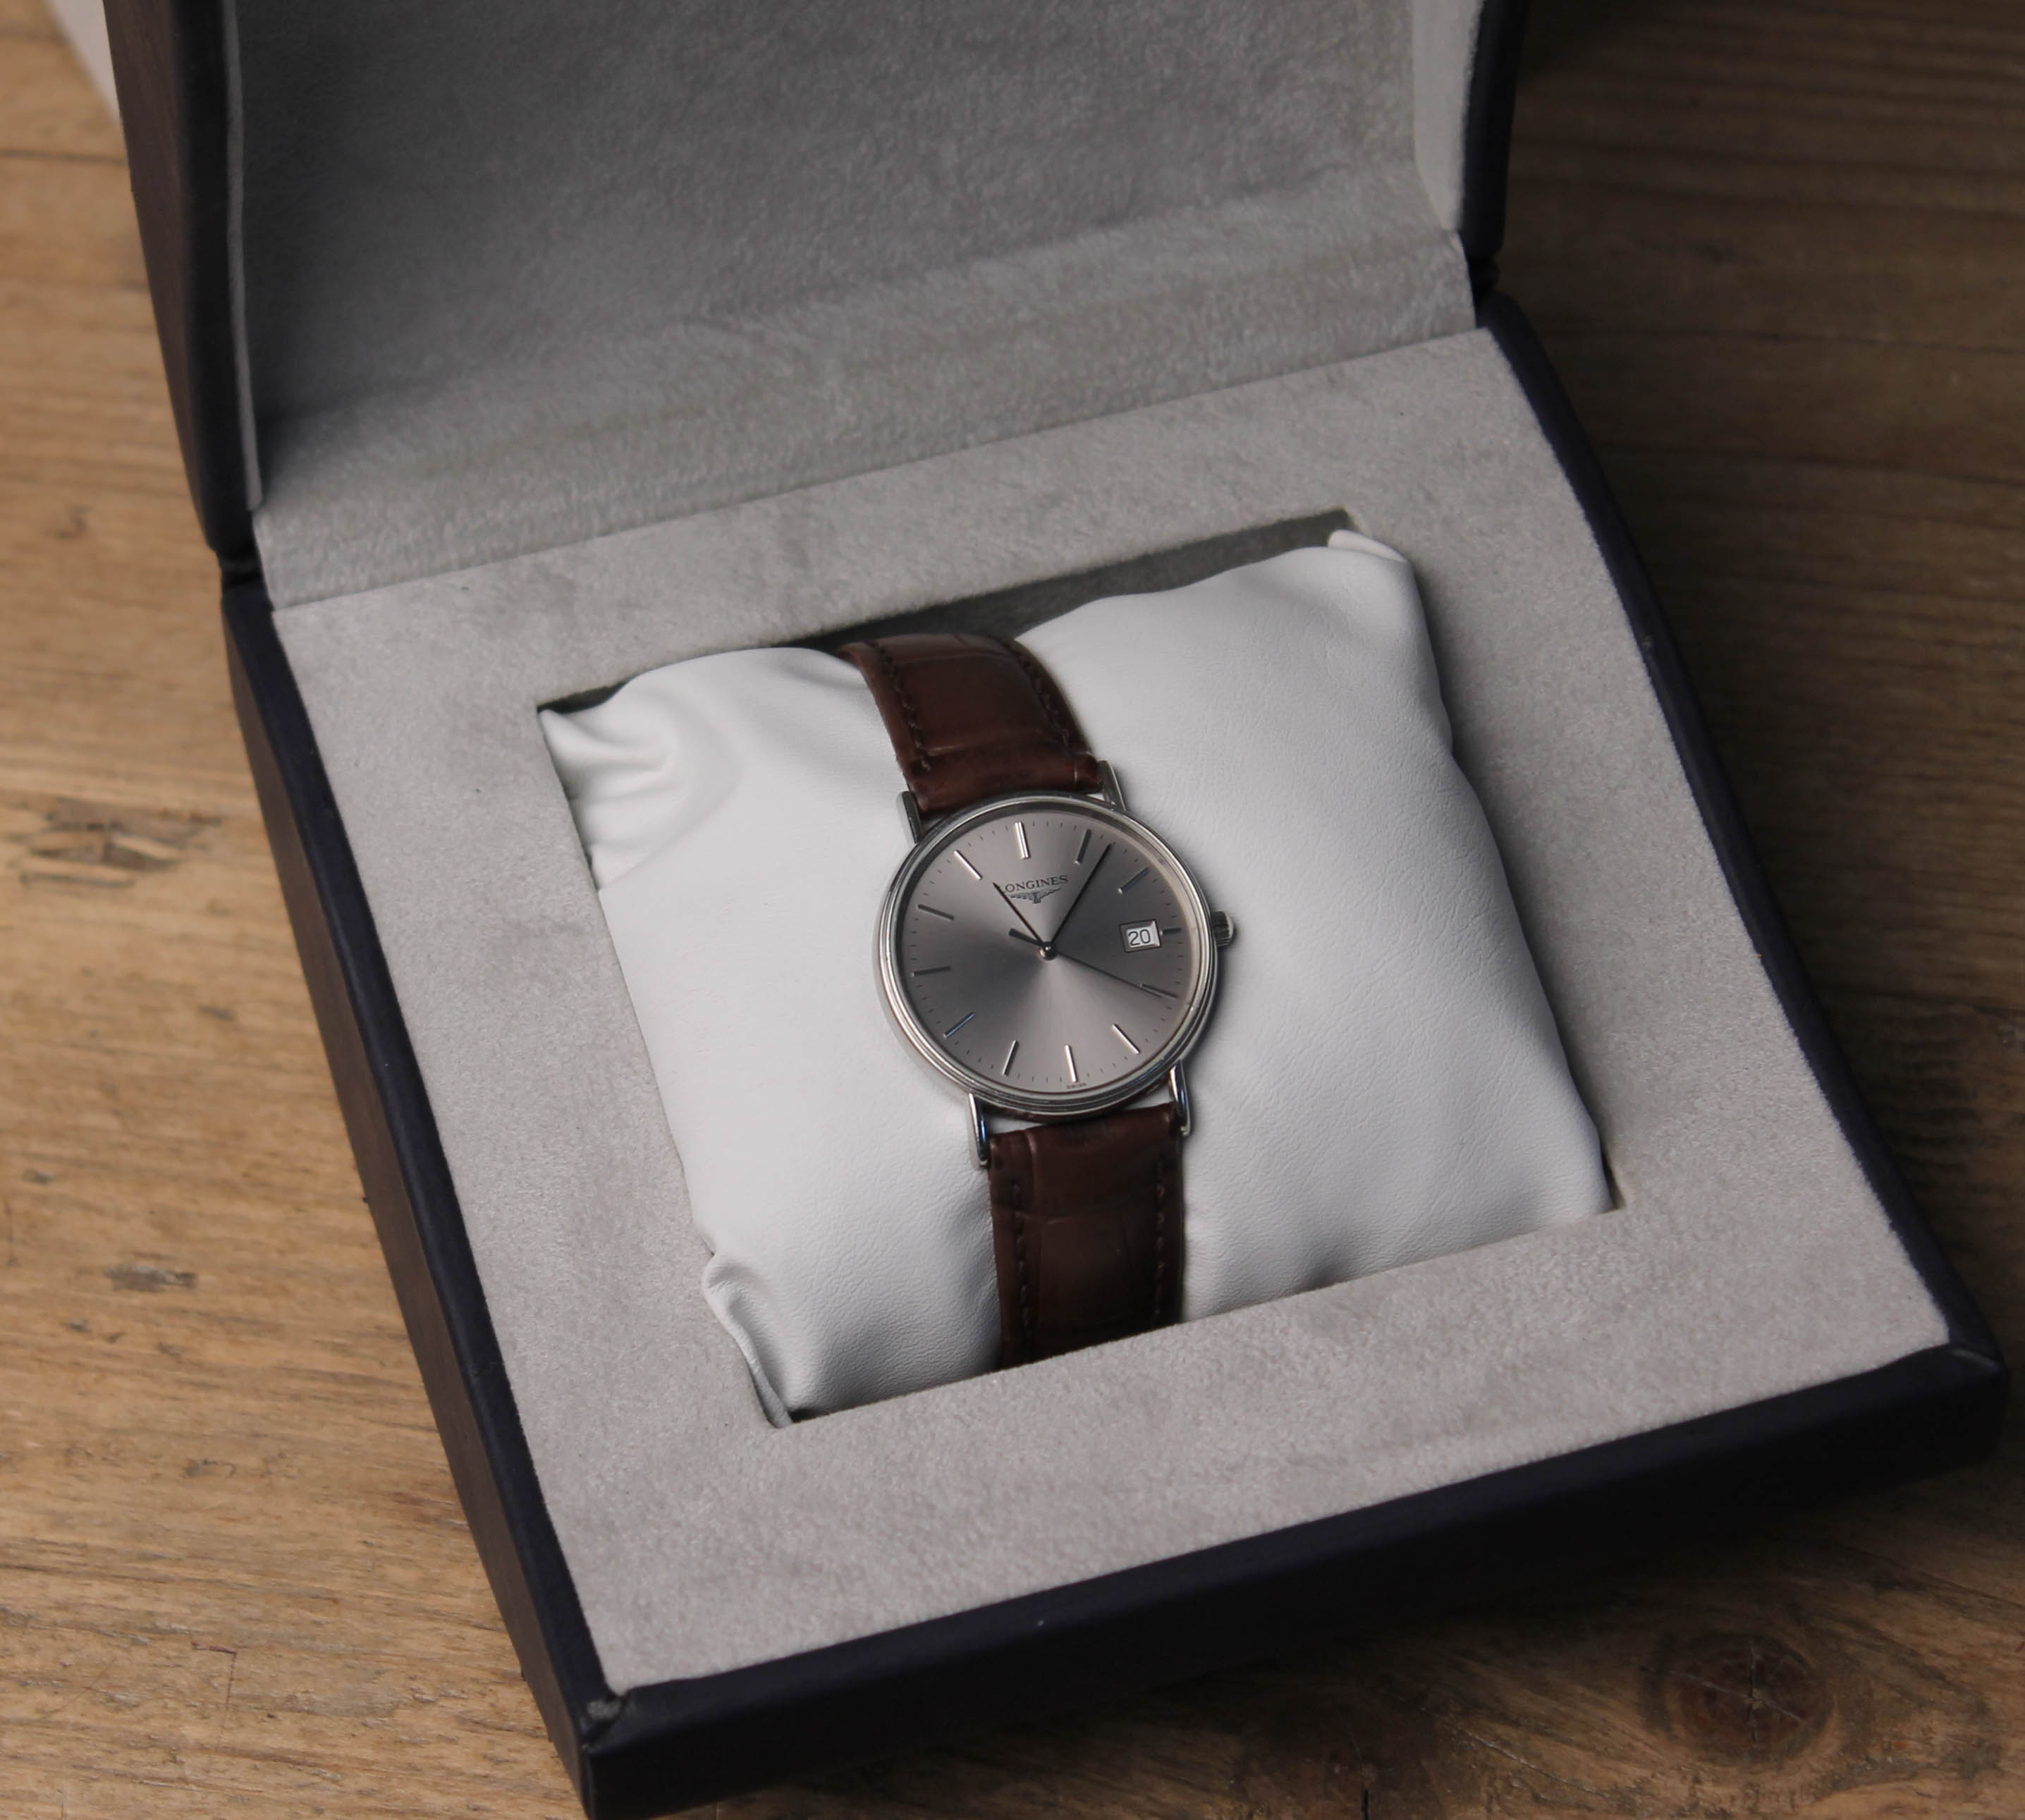 A Longines wristwatch with leather strap and box.